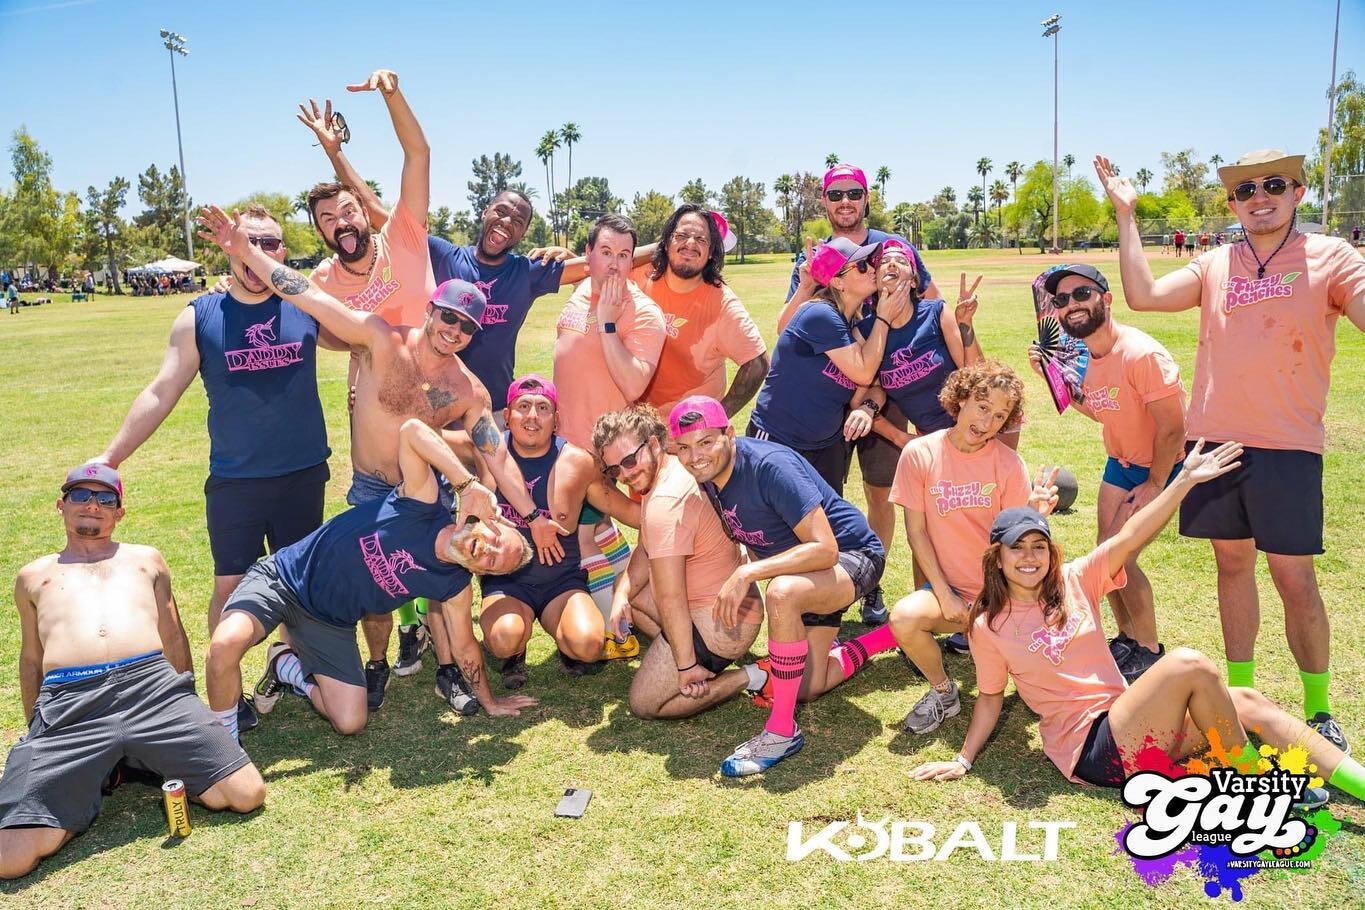 Just a few of our faves from 📸 day last week!! Good luck to all 17 of our teams in the Spring season tournament this Sunday! Season Closing Party/Awards Ceremony at @kobaltbarphoenix to follow around 2:00PM! 🔴🏃🏾🏳️&zwj;🌈
.
.
#SundayFunday #phxki